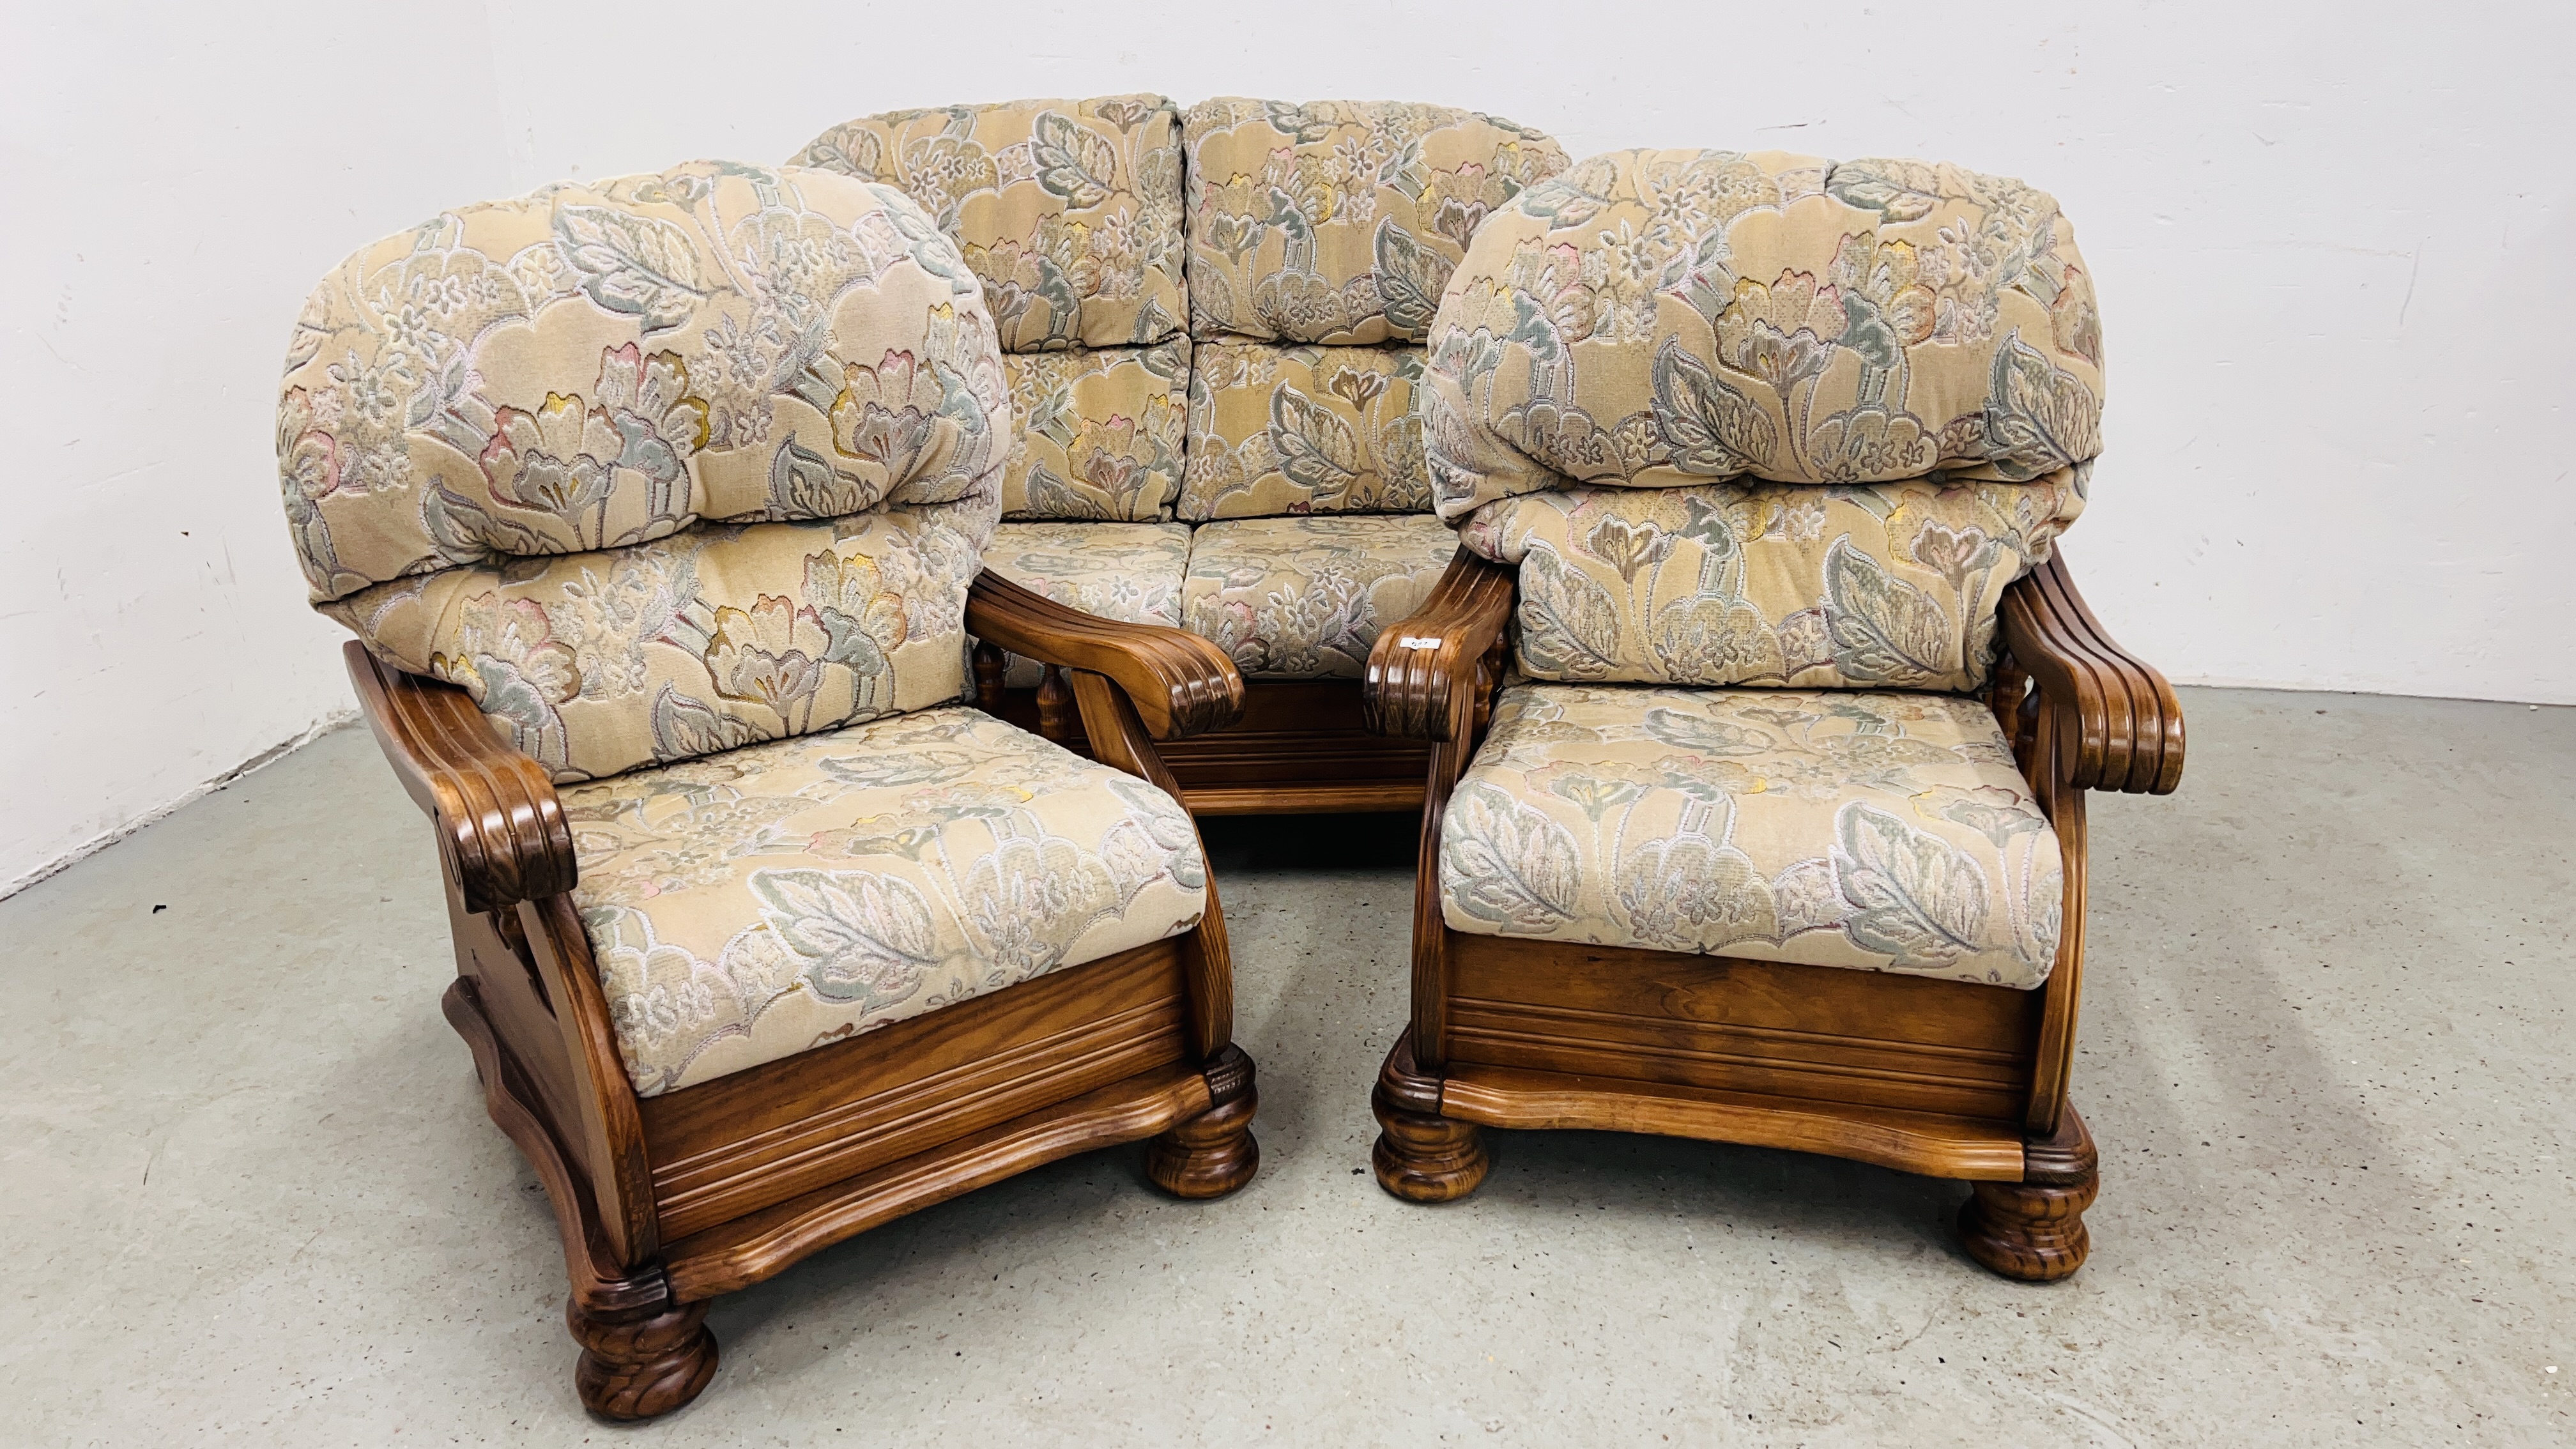 A GOOD QUALITY COTTAGE LOUNGE SUITE WITH HEAVY WOODEN FRAME.